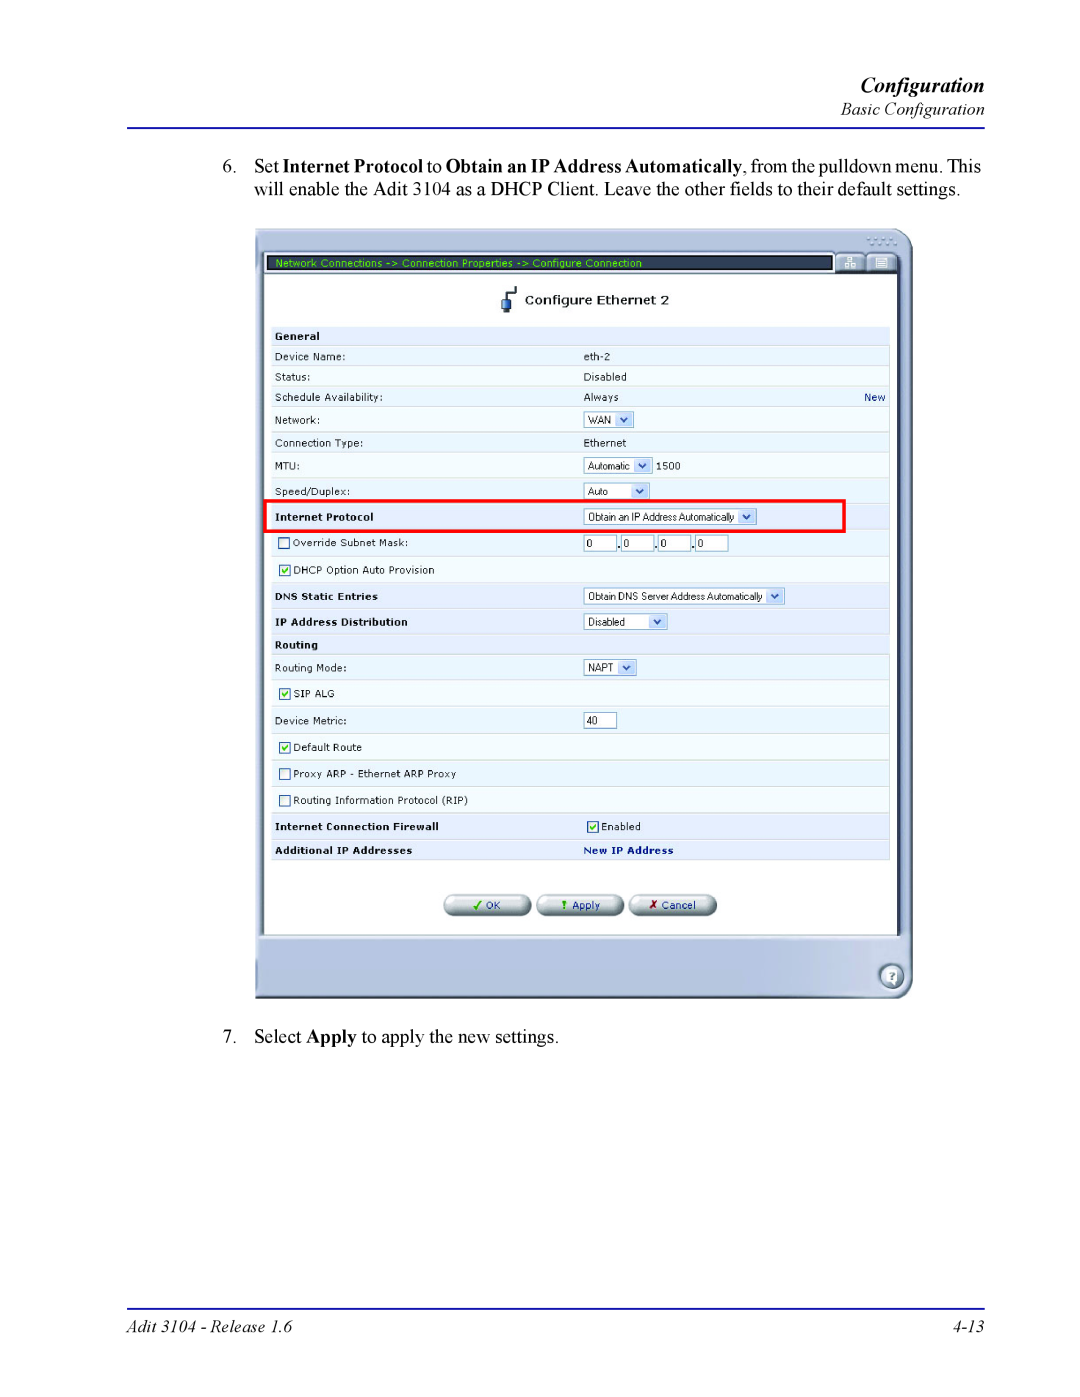 Carrier Access Adit 3104 user manual Configuration, Select Apply to apply the new settings 